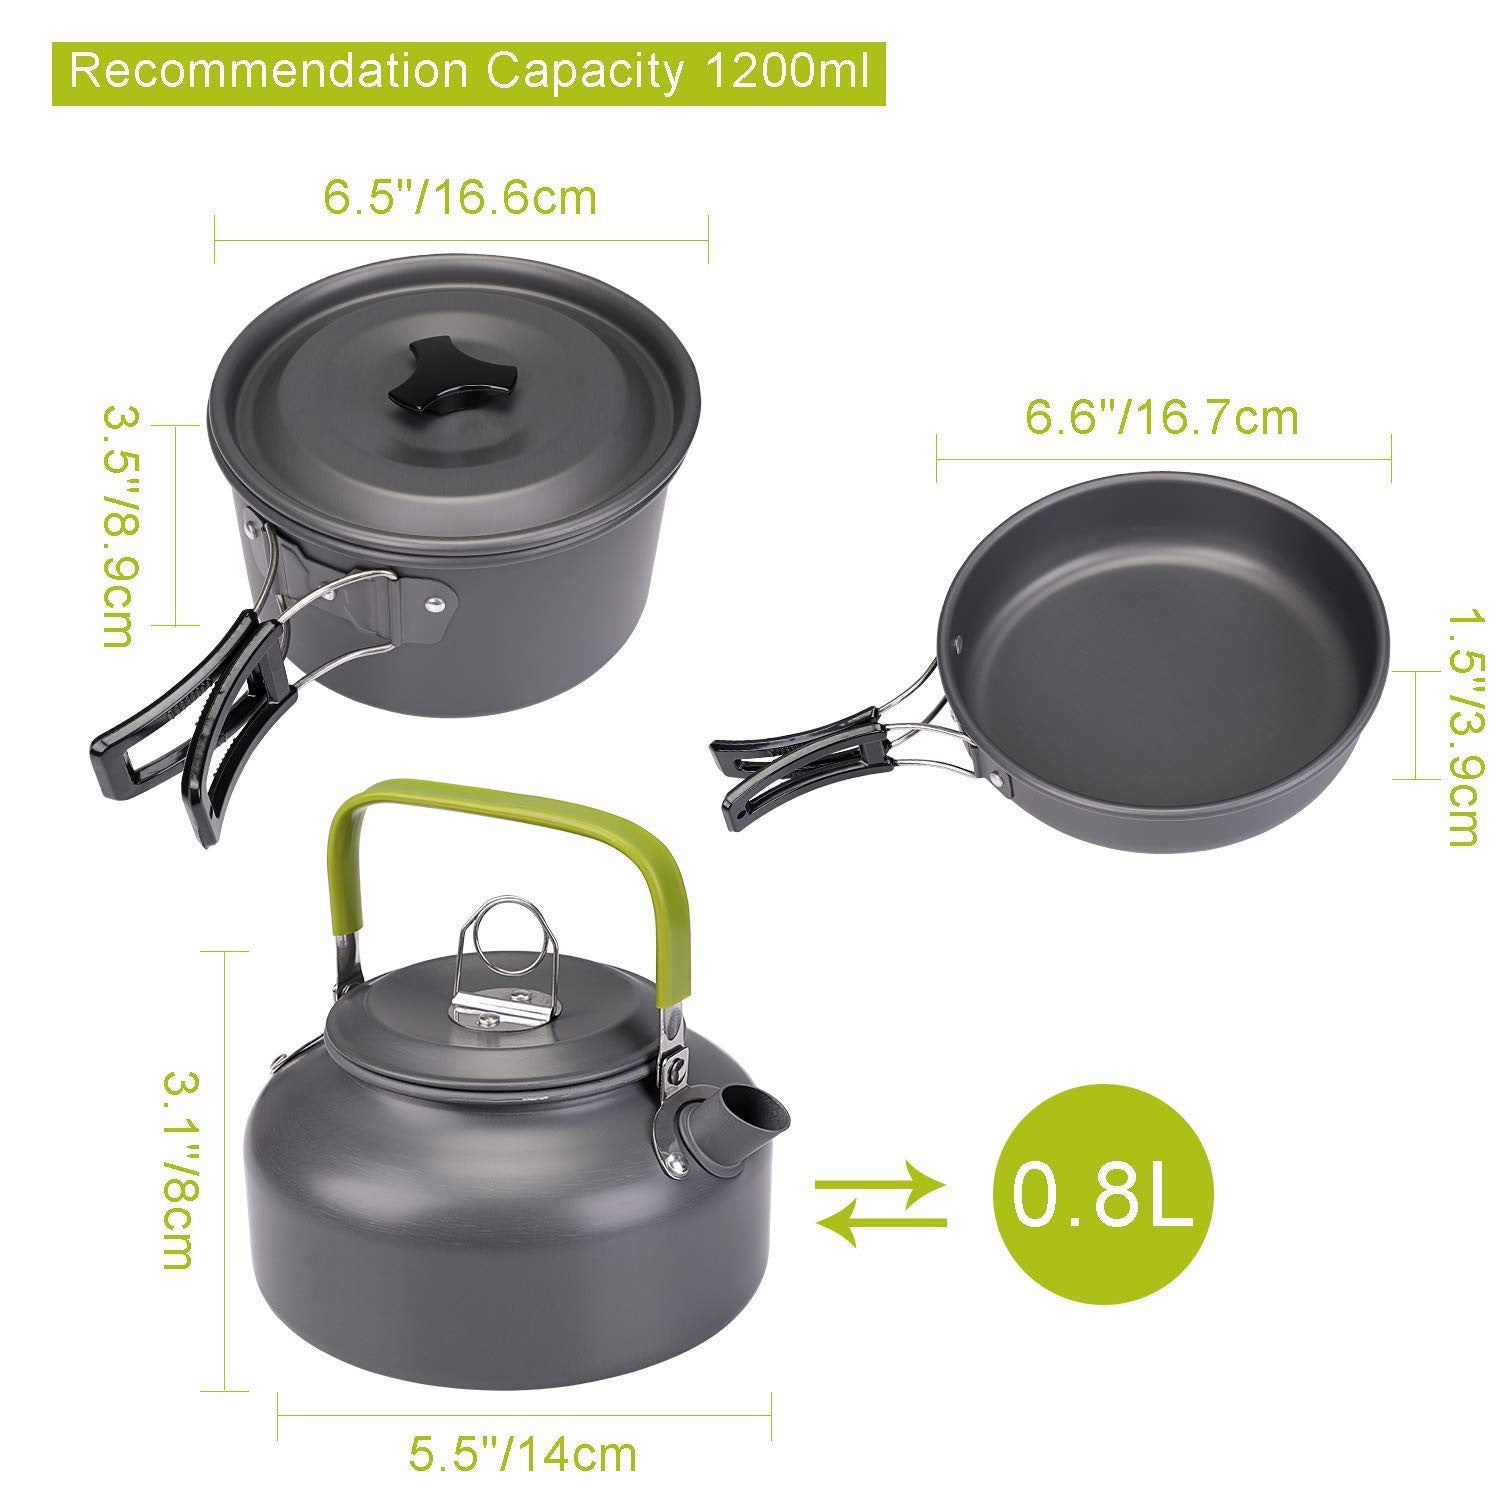 Cooking Set size